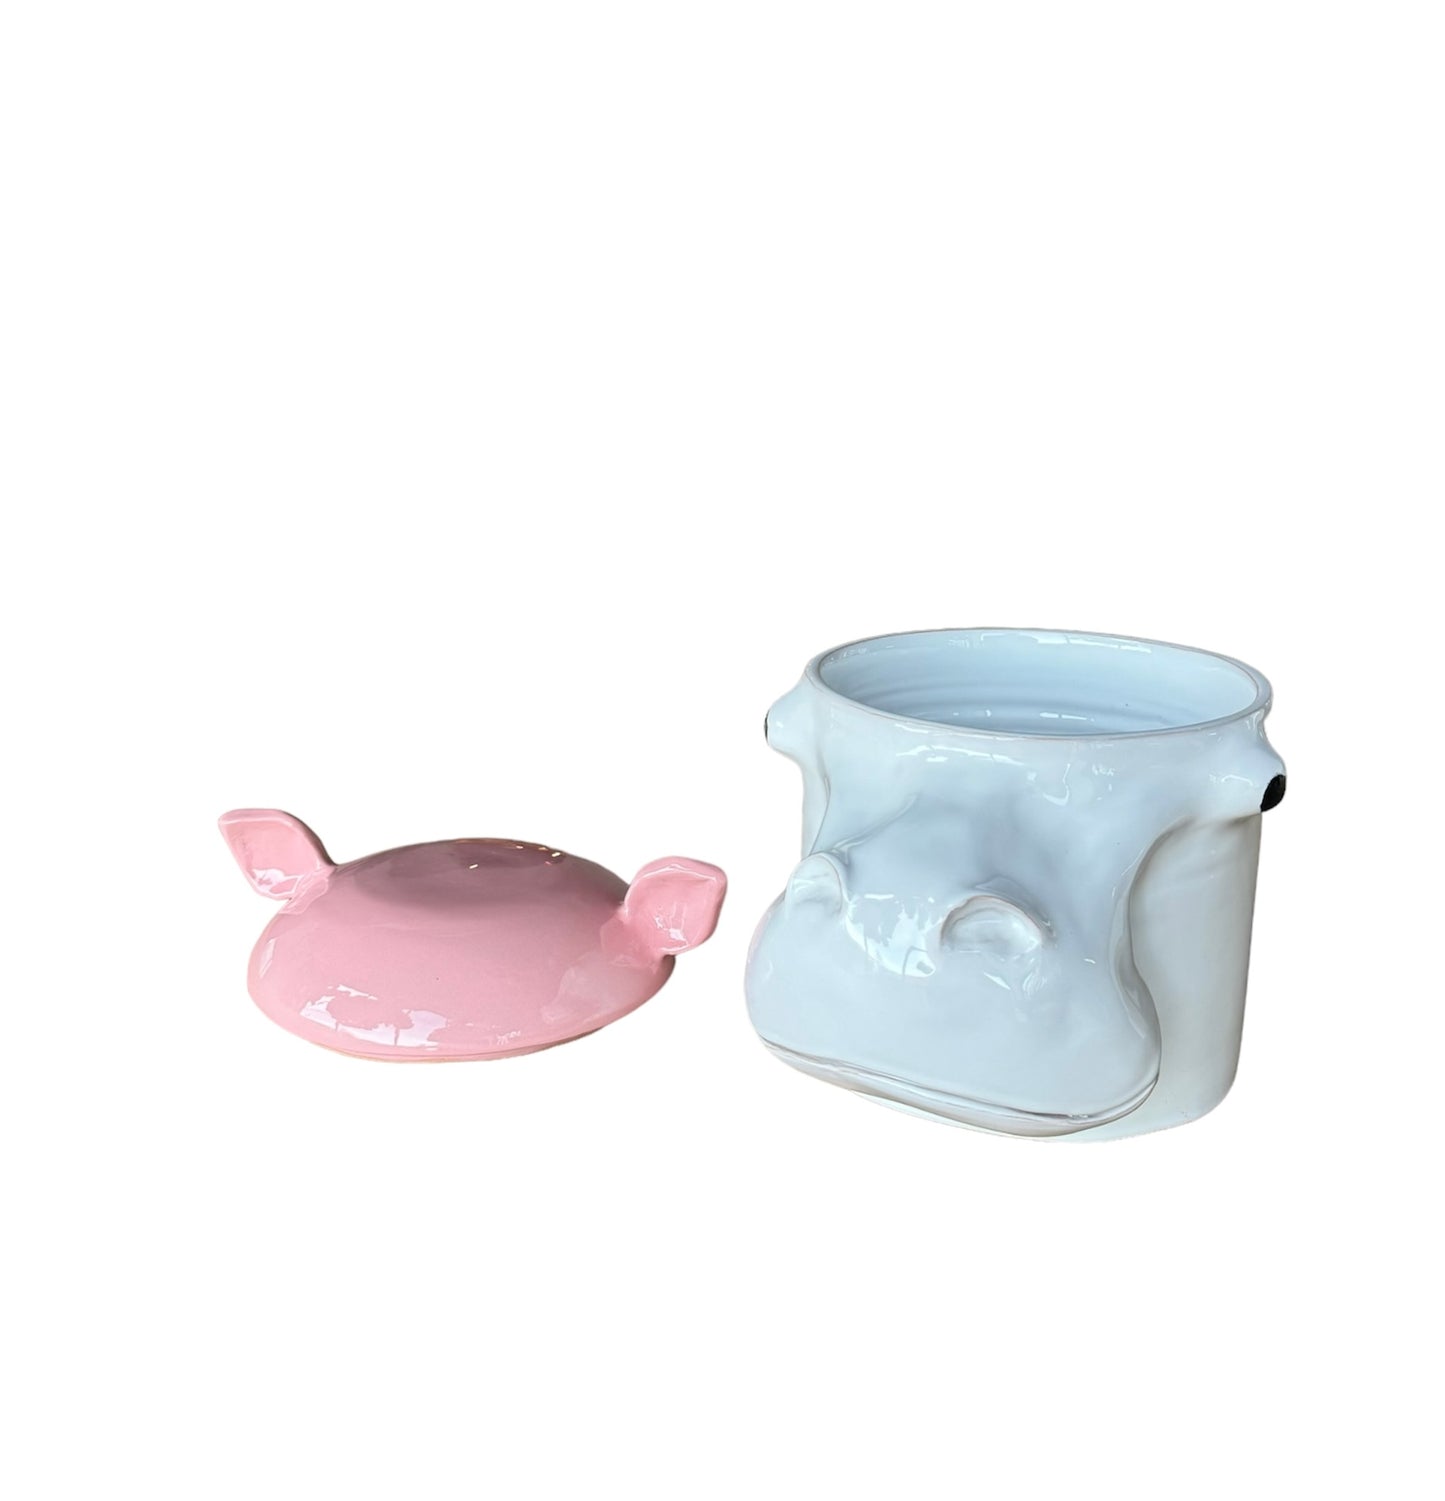 CONTAINER HIPPO S PINK AND WHITE IN CERAMIC